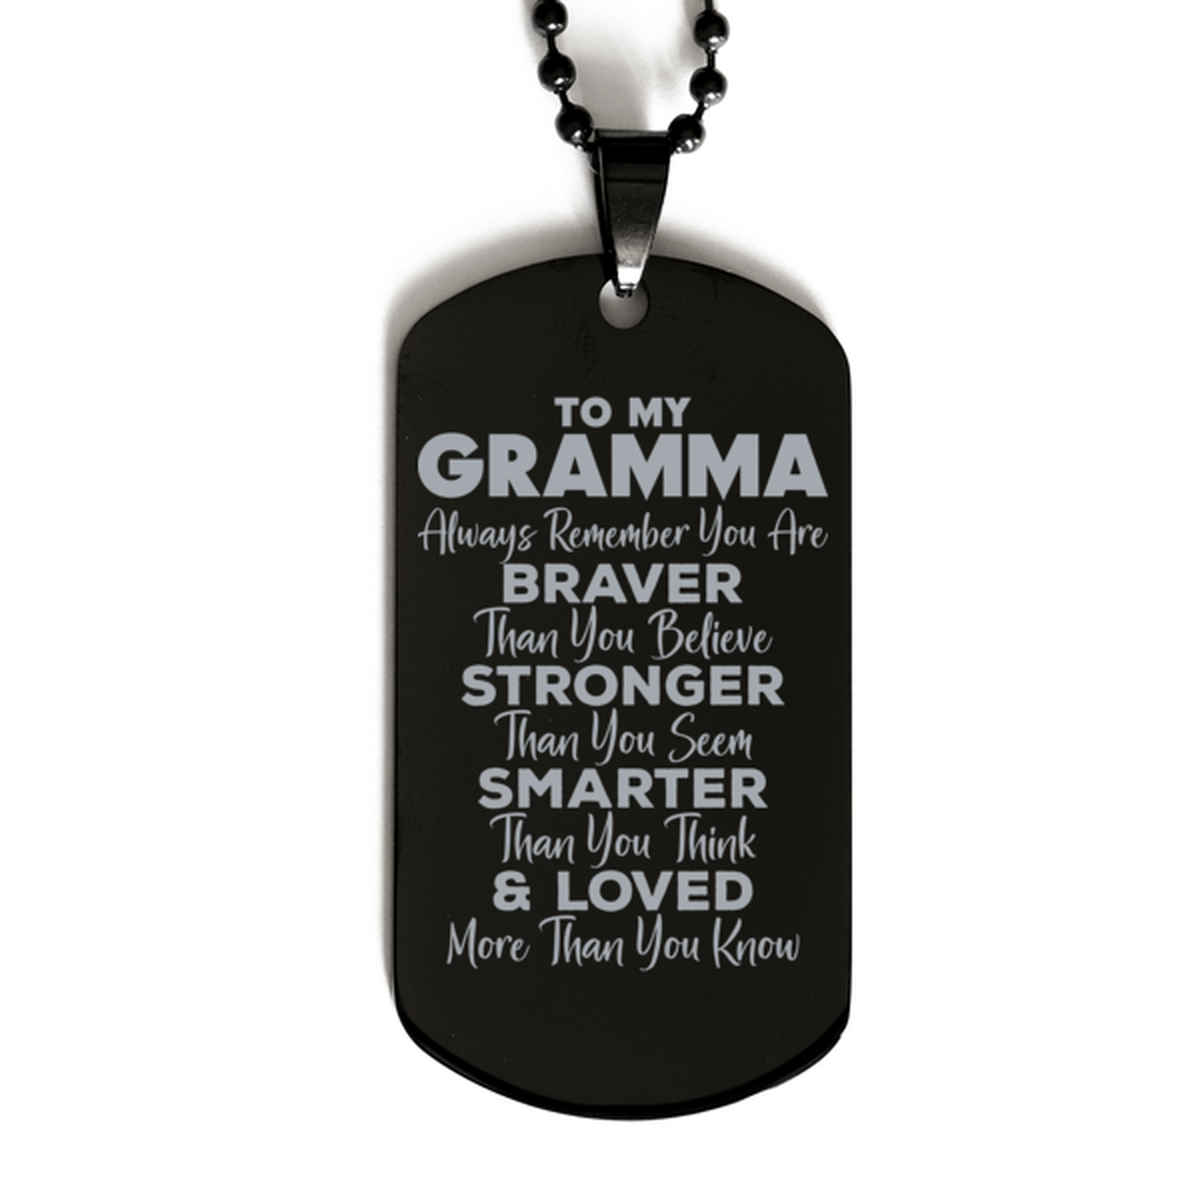 Motivational Gramma Black Dog Tag Necklace, Gramma Always Remember You Are Braver Than You Believe, Best Birthday Gifts for Gramma